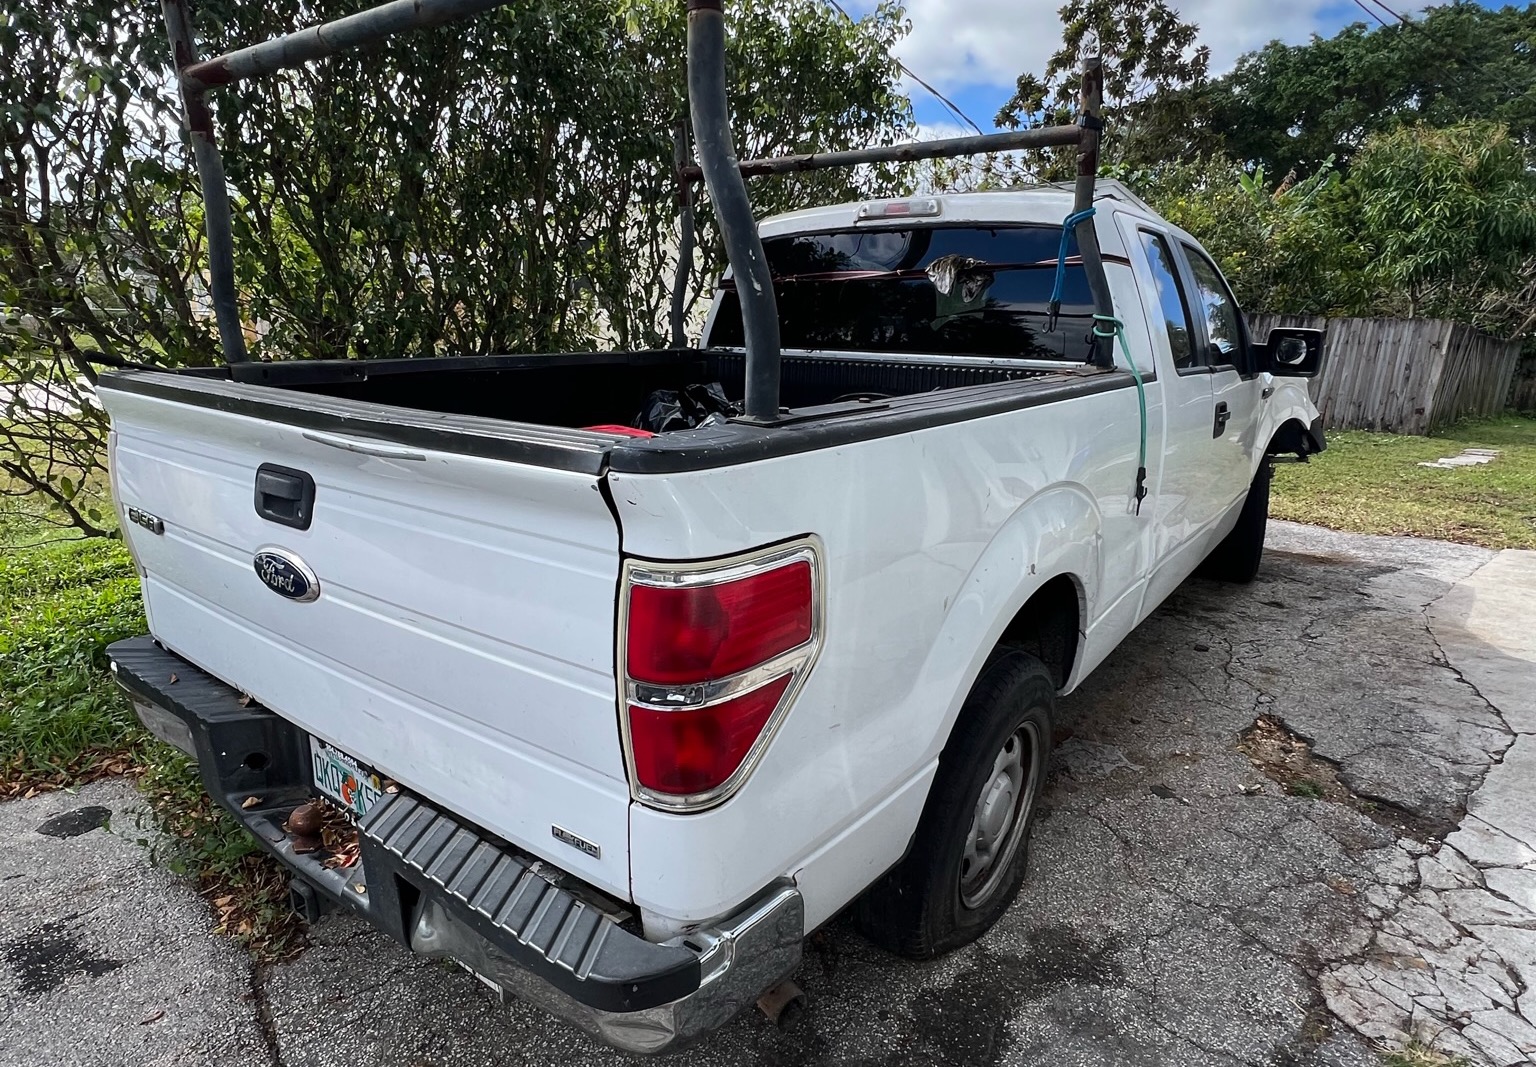 Junk truck removed in South Florida